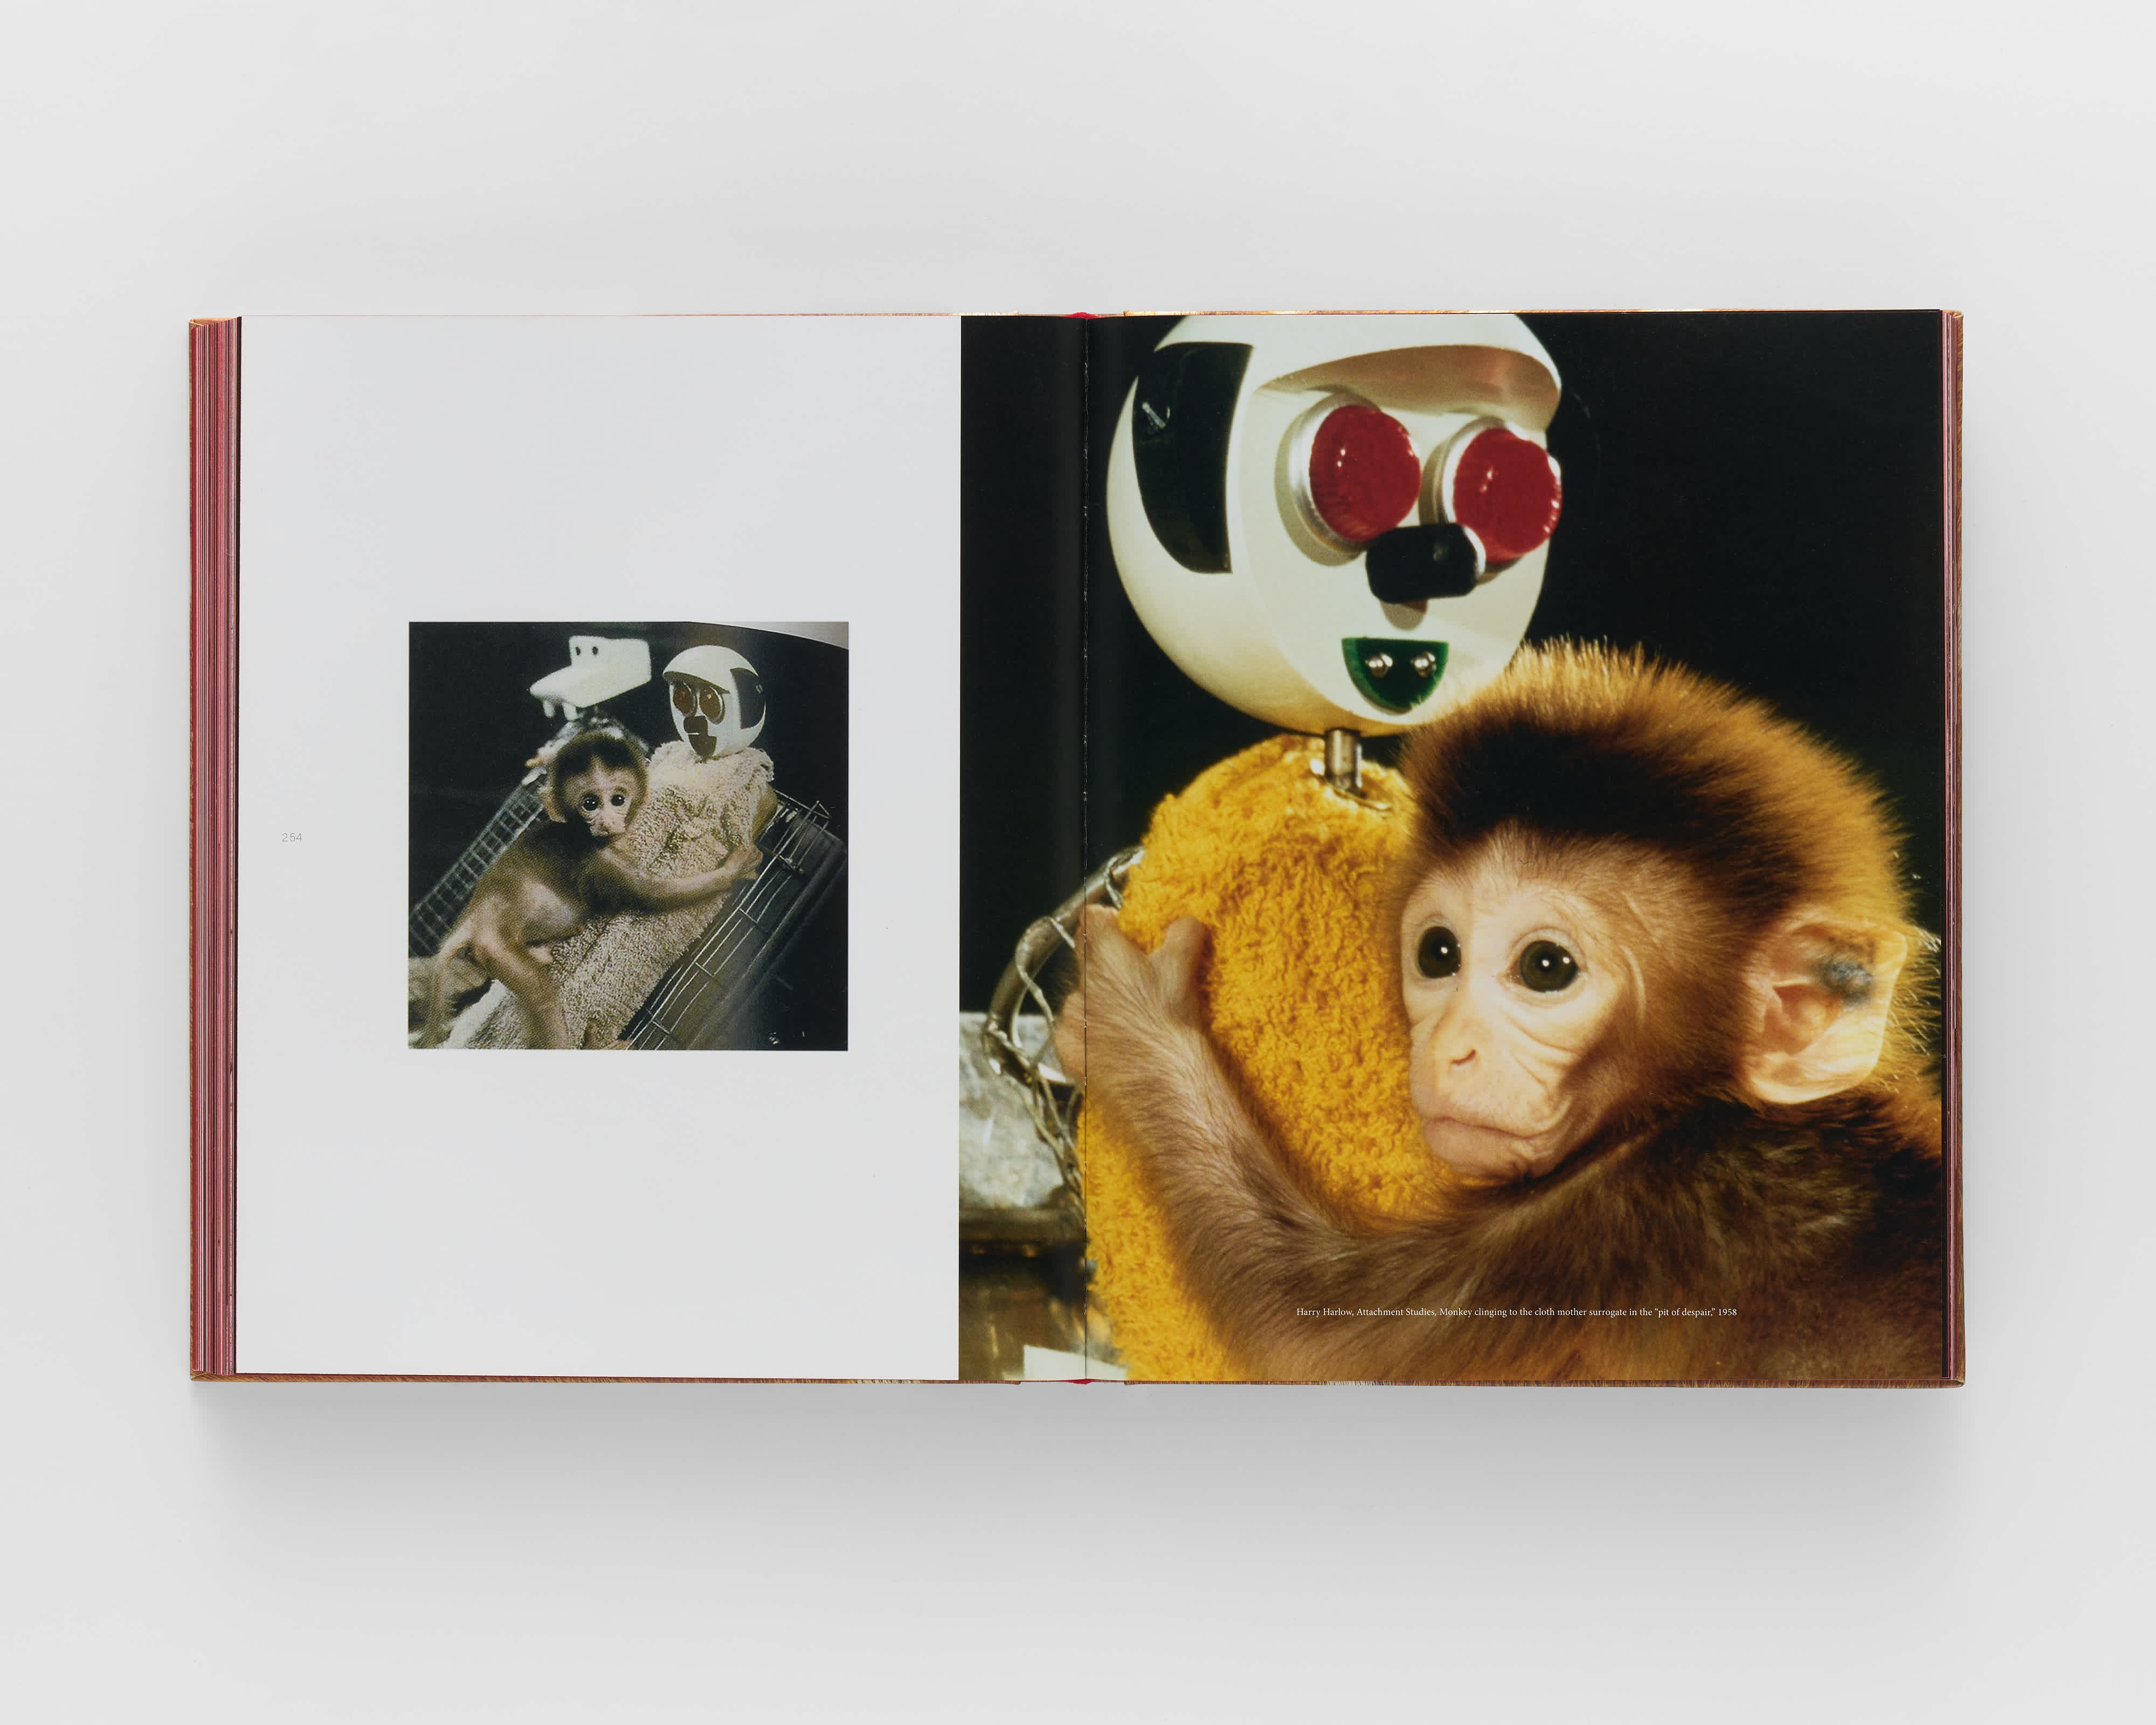 Open book with a photo of a baby monkey holding a robot on each page. On the left page the photo is centered amidst a white background. The image on the right page is full-bleed. 